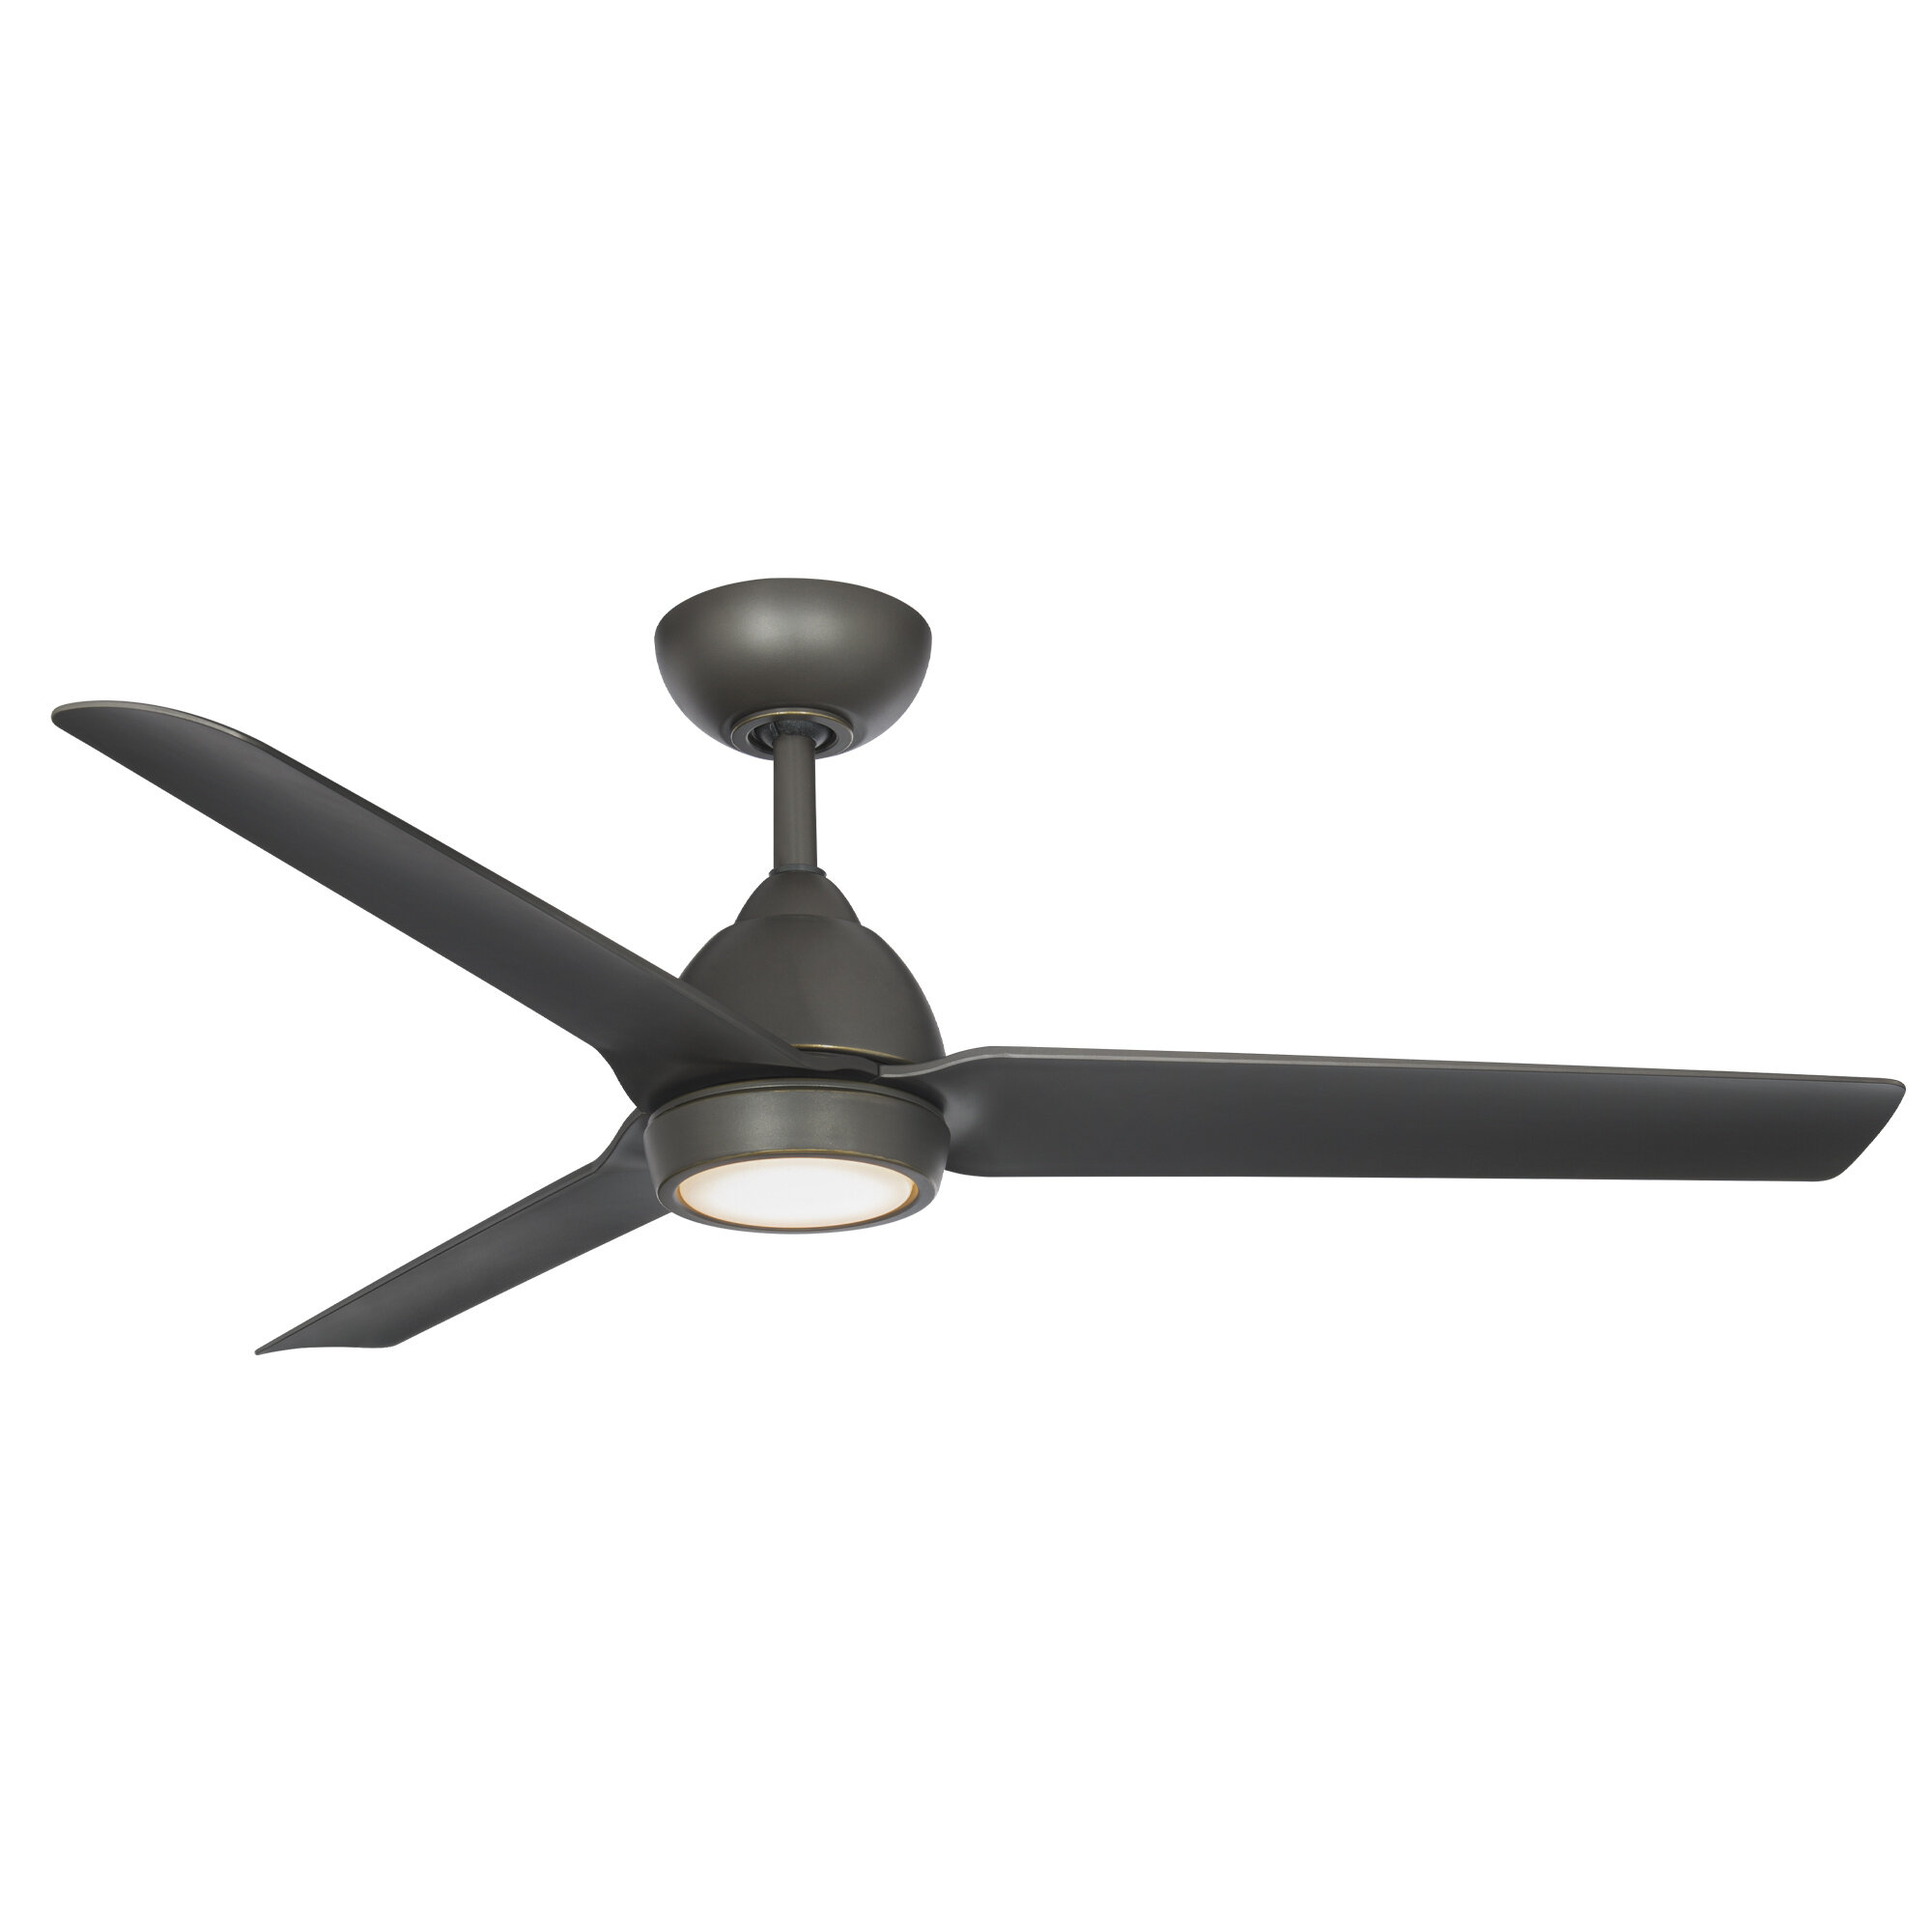 Wac Lighting 54 Mocha 3 Blade Outdoor Smart Propeller Ceiling Fan With And Light Kit Included Reviews Wayfair